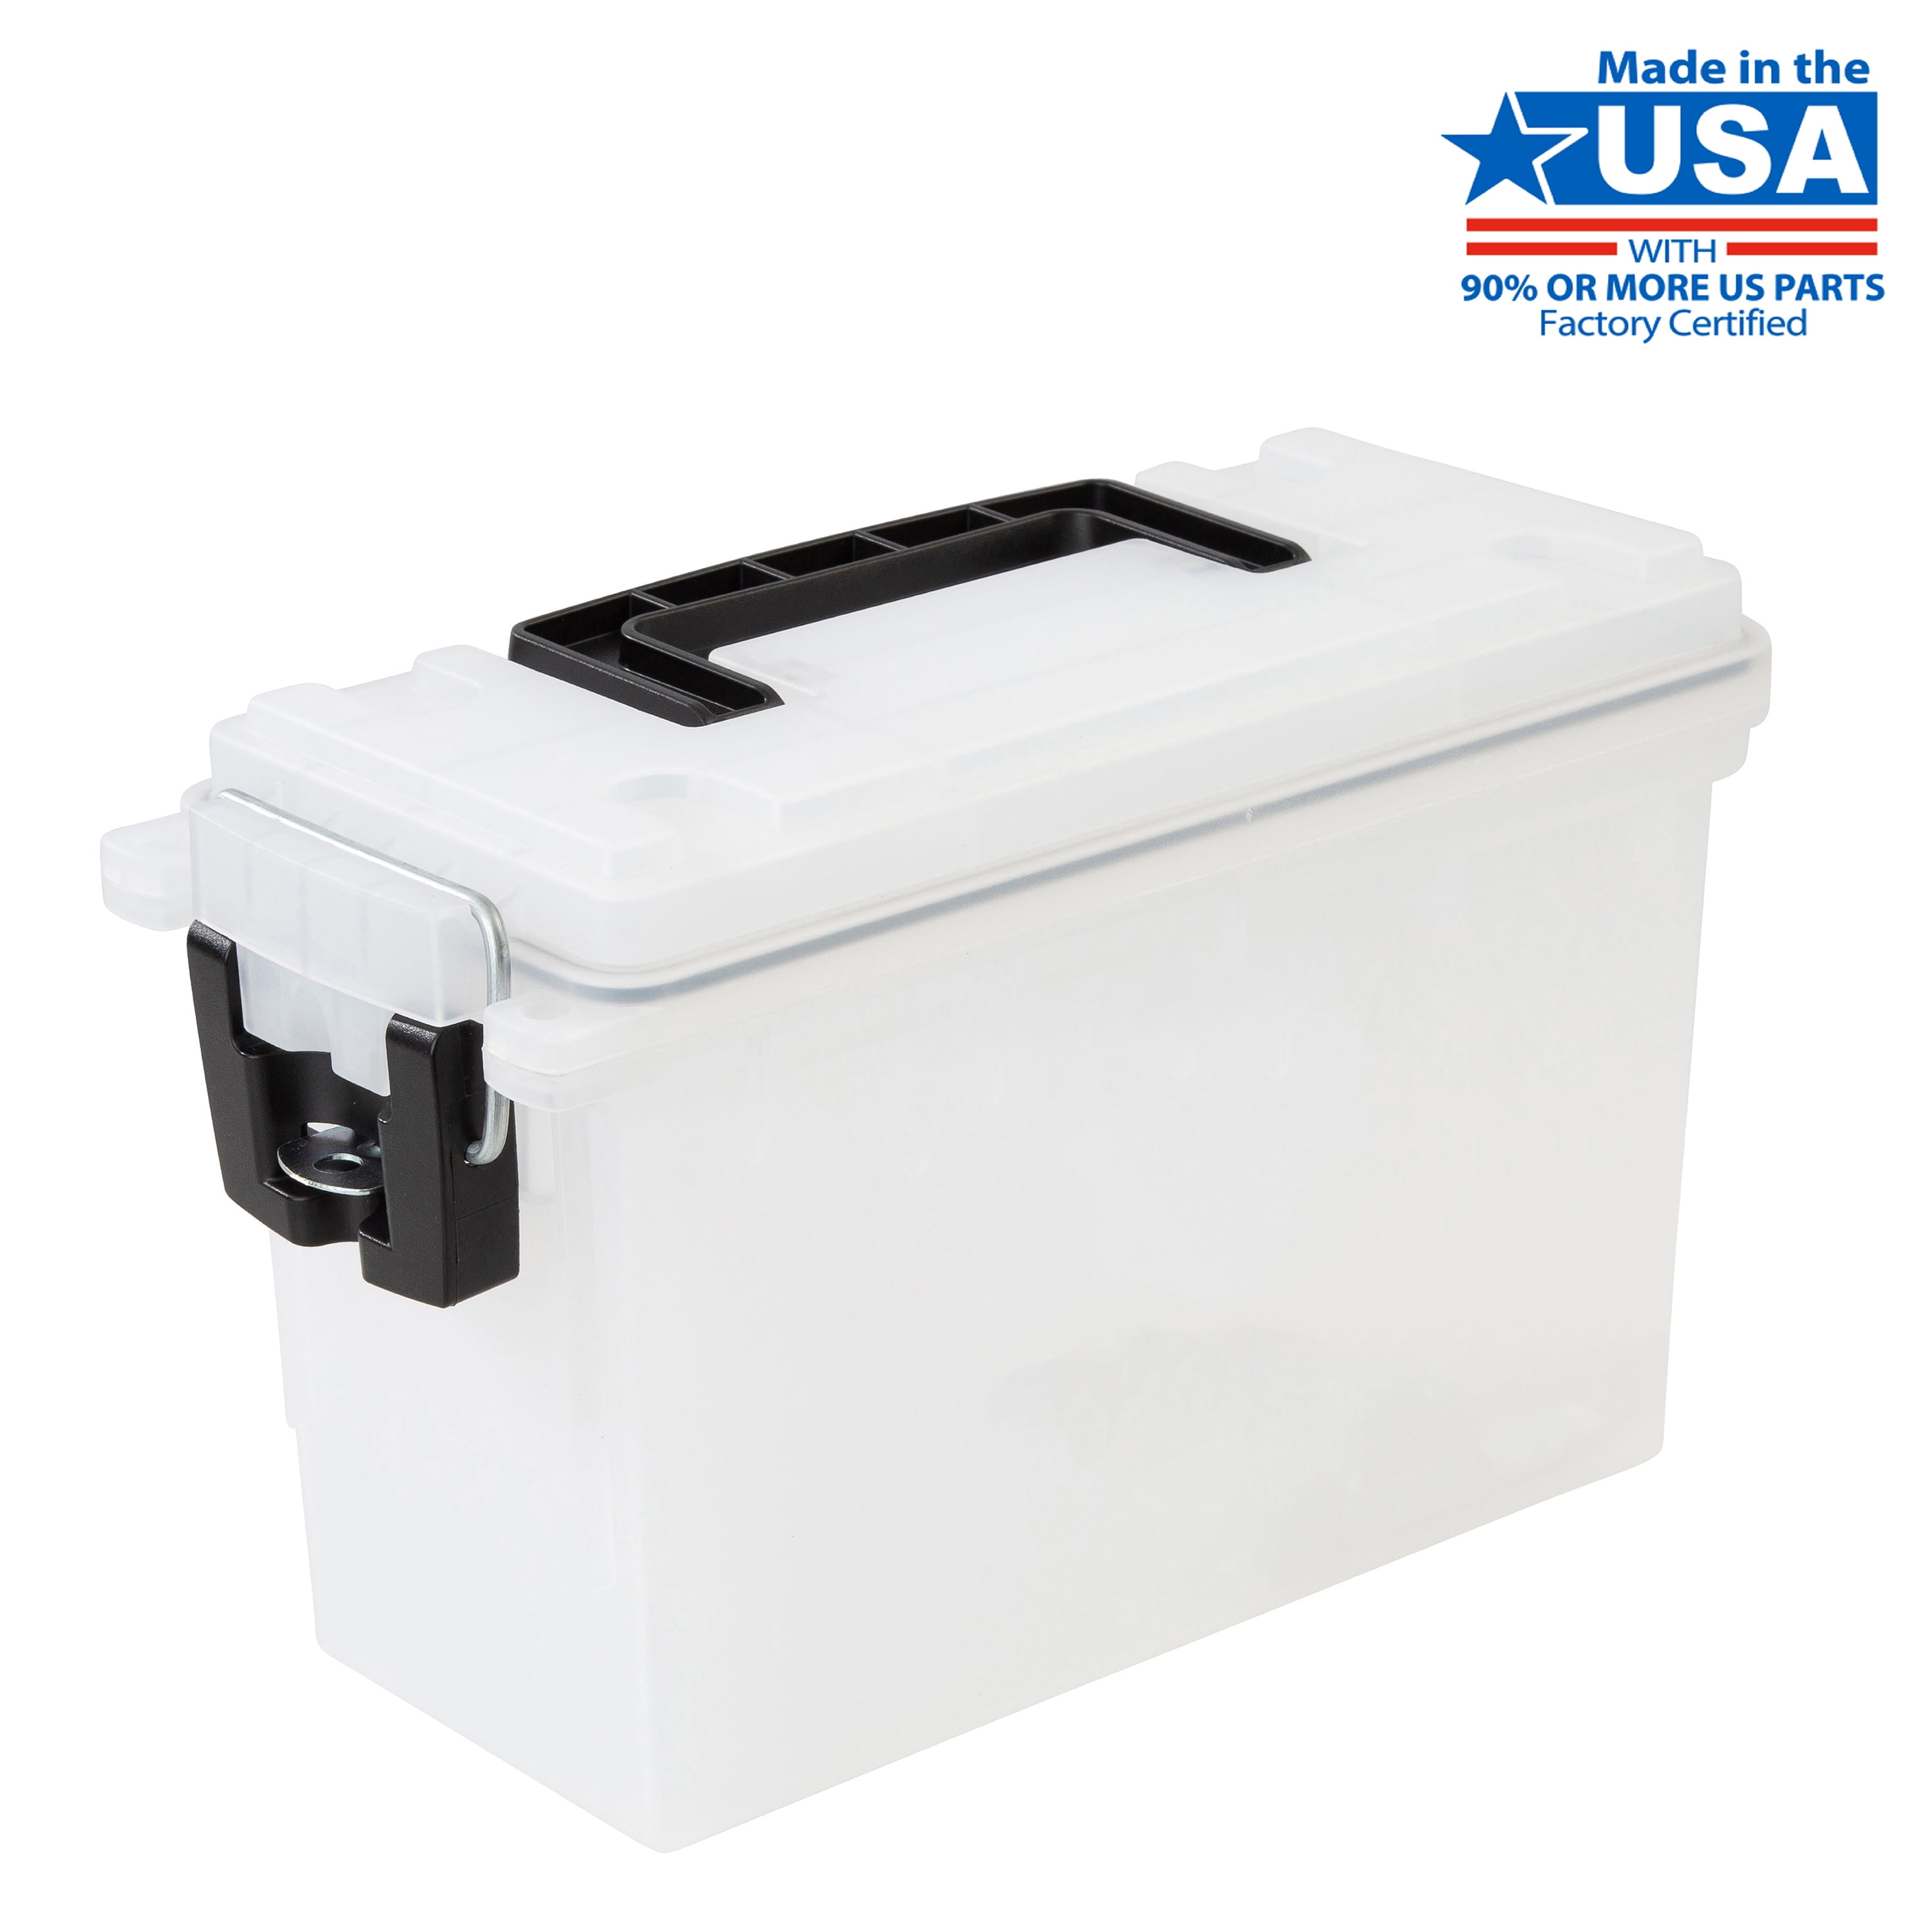 Hyper Tough Frost Locking and Stacking Utility Box, Durable plastic 11.5" x 5.06" x 7.25"